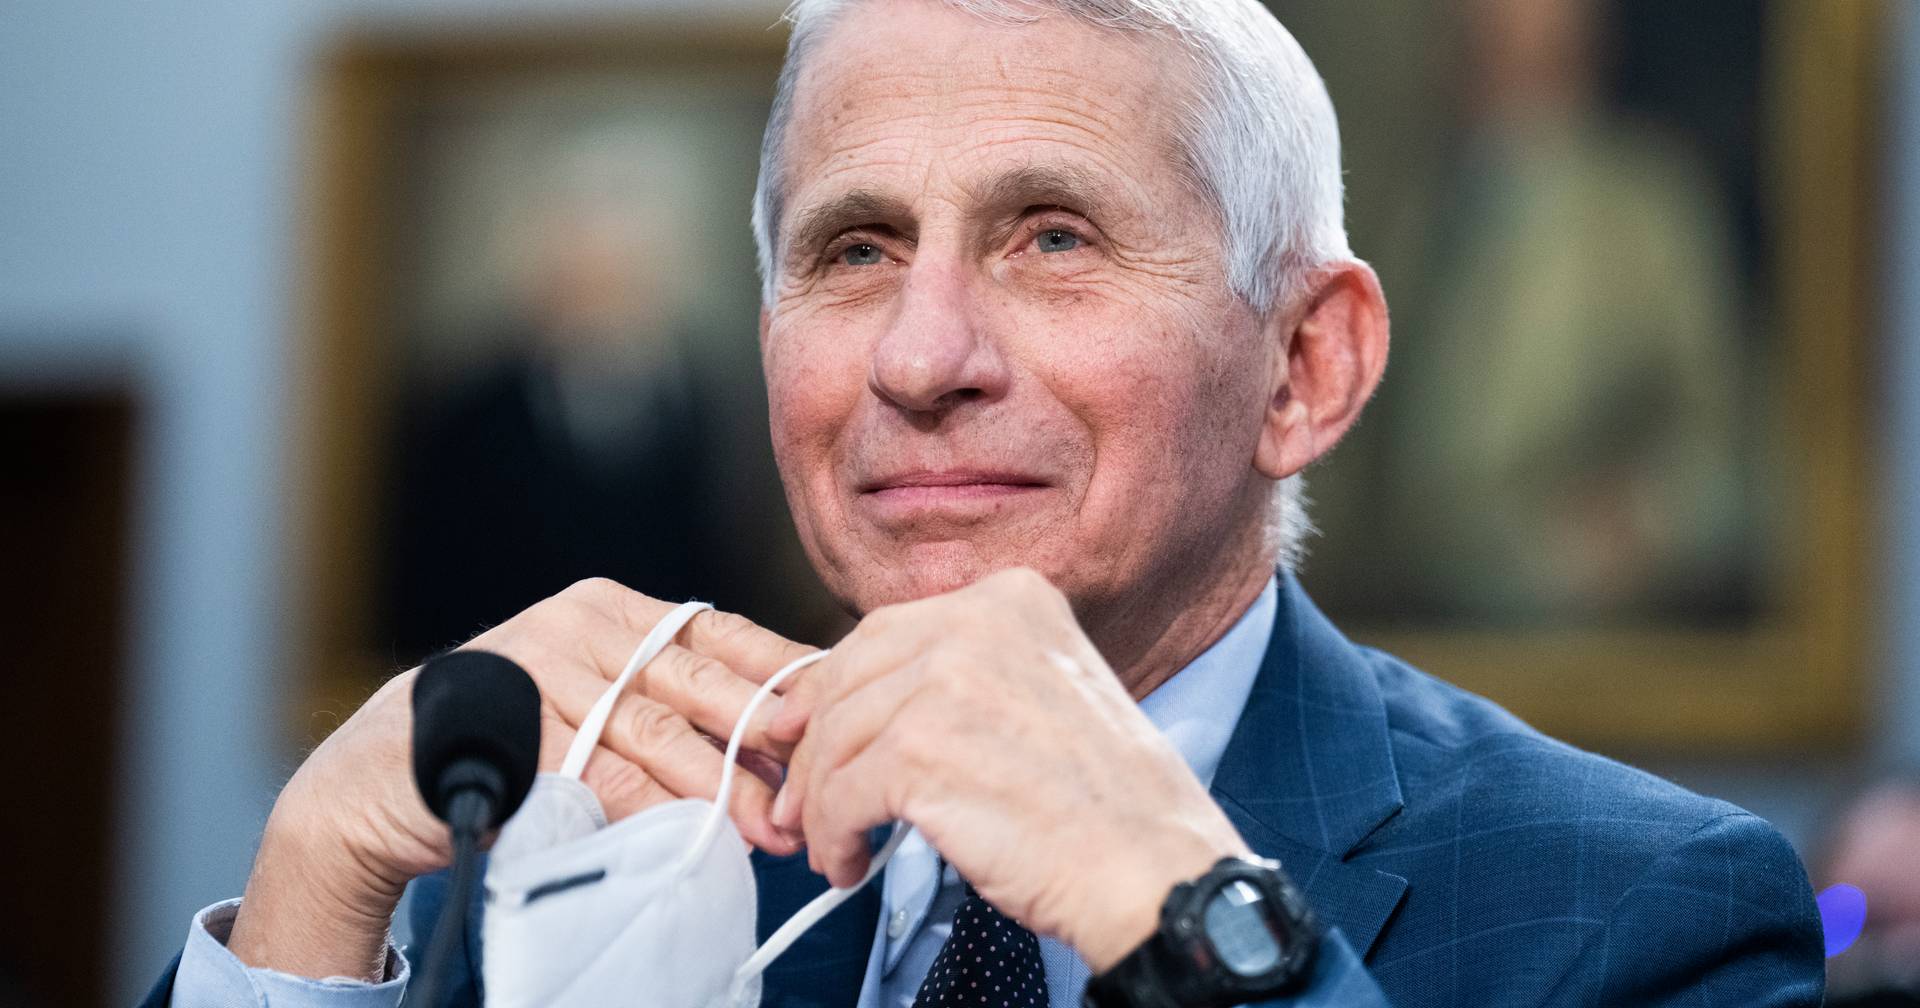 Anthony Fauci ended his career at the age of 82, and has always been devoted to science.